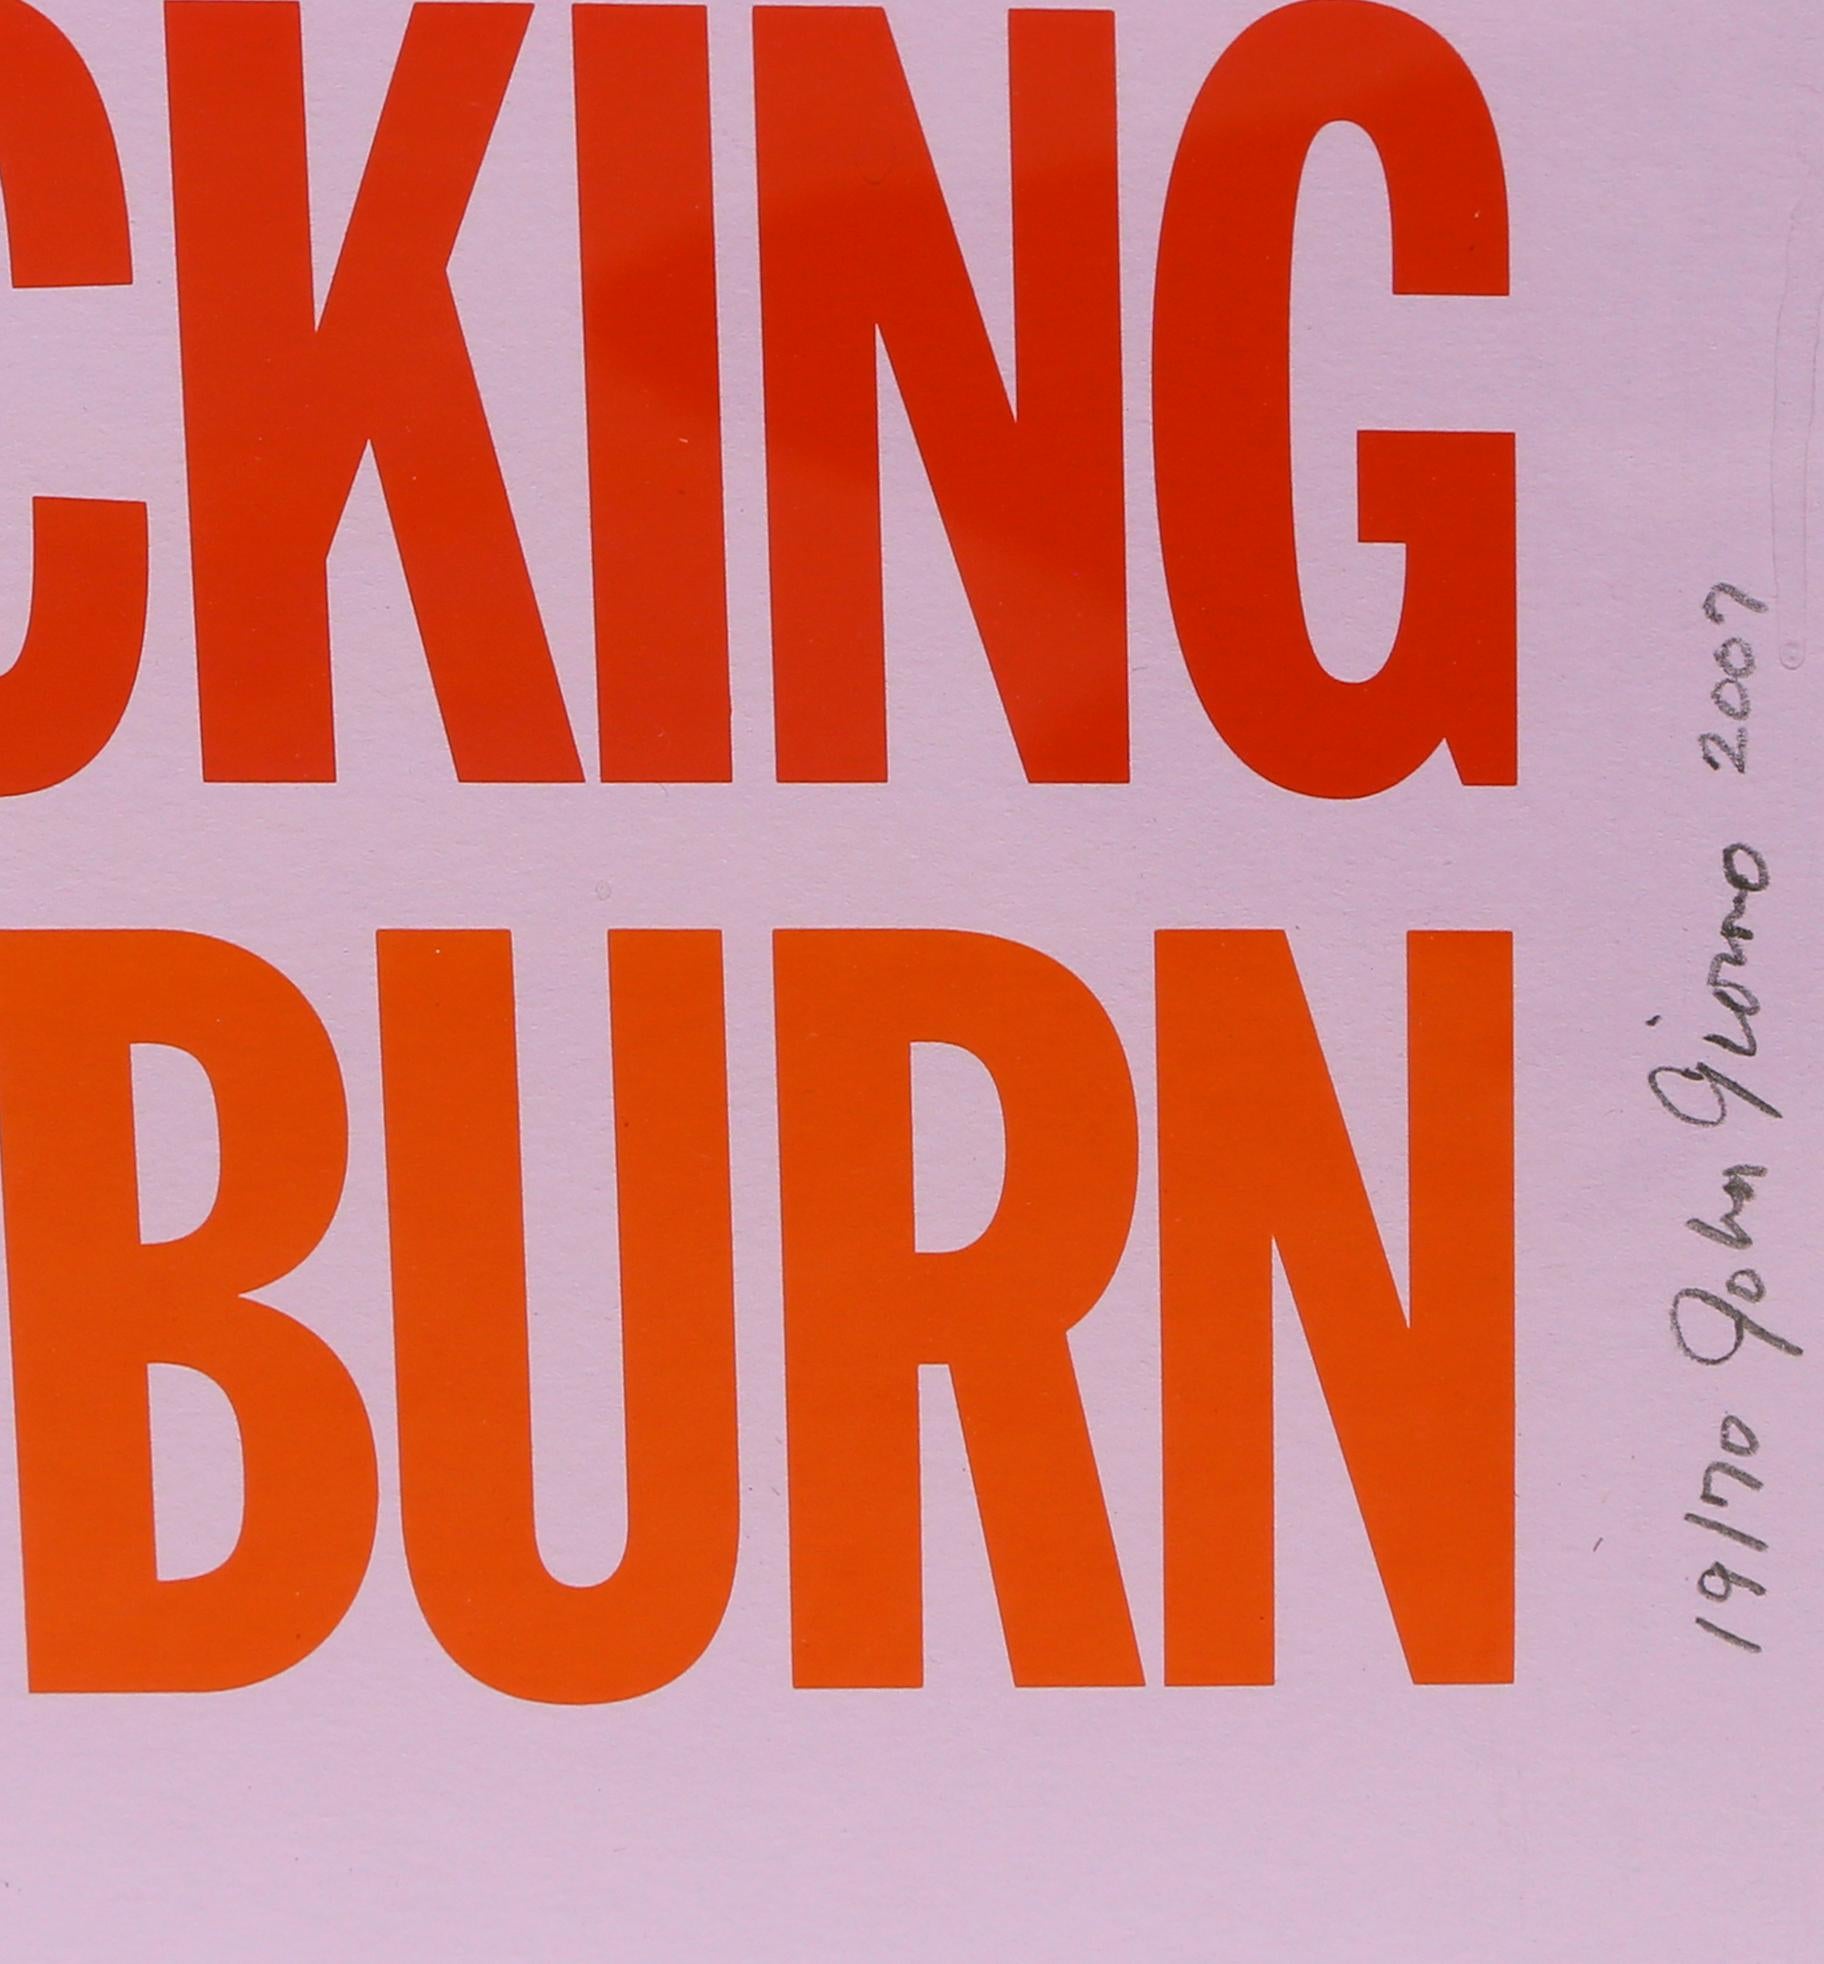 Artist: John Giorno
Title: Voluminous Voluptuous Borgainvillea Are Flames Licking What Cannot Burn
Portfolio: Welcoming the Flowers
Date: 2007
Screenprint, signed, numbered, and dated in pencil
Edition of 19/70
Size: 16.5 x 16.5 in. (41.91 x 41.91